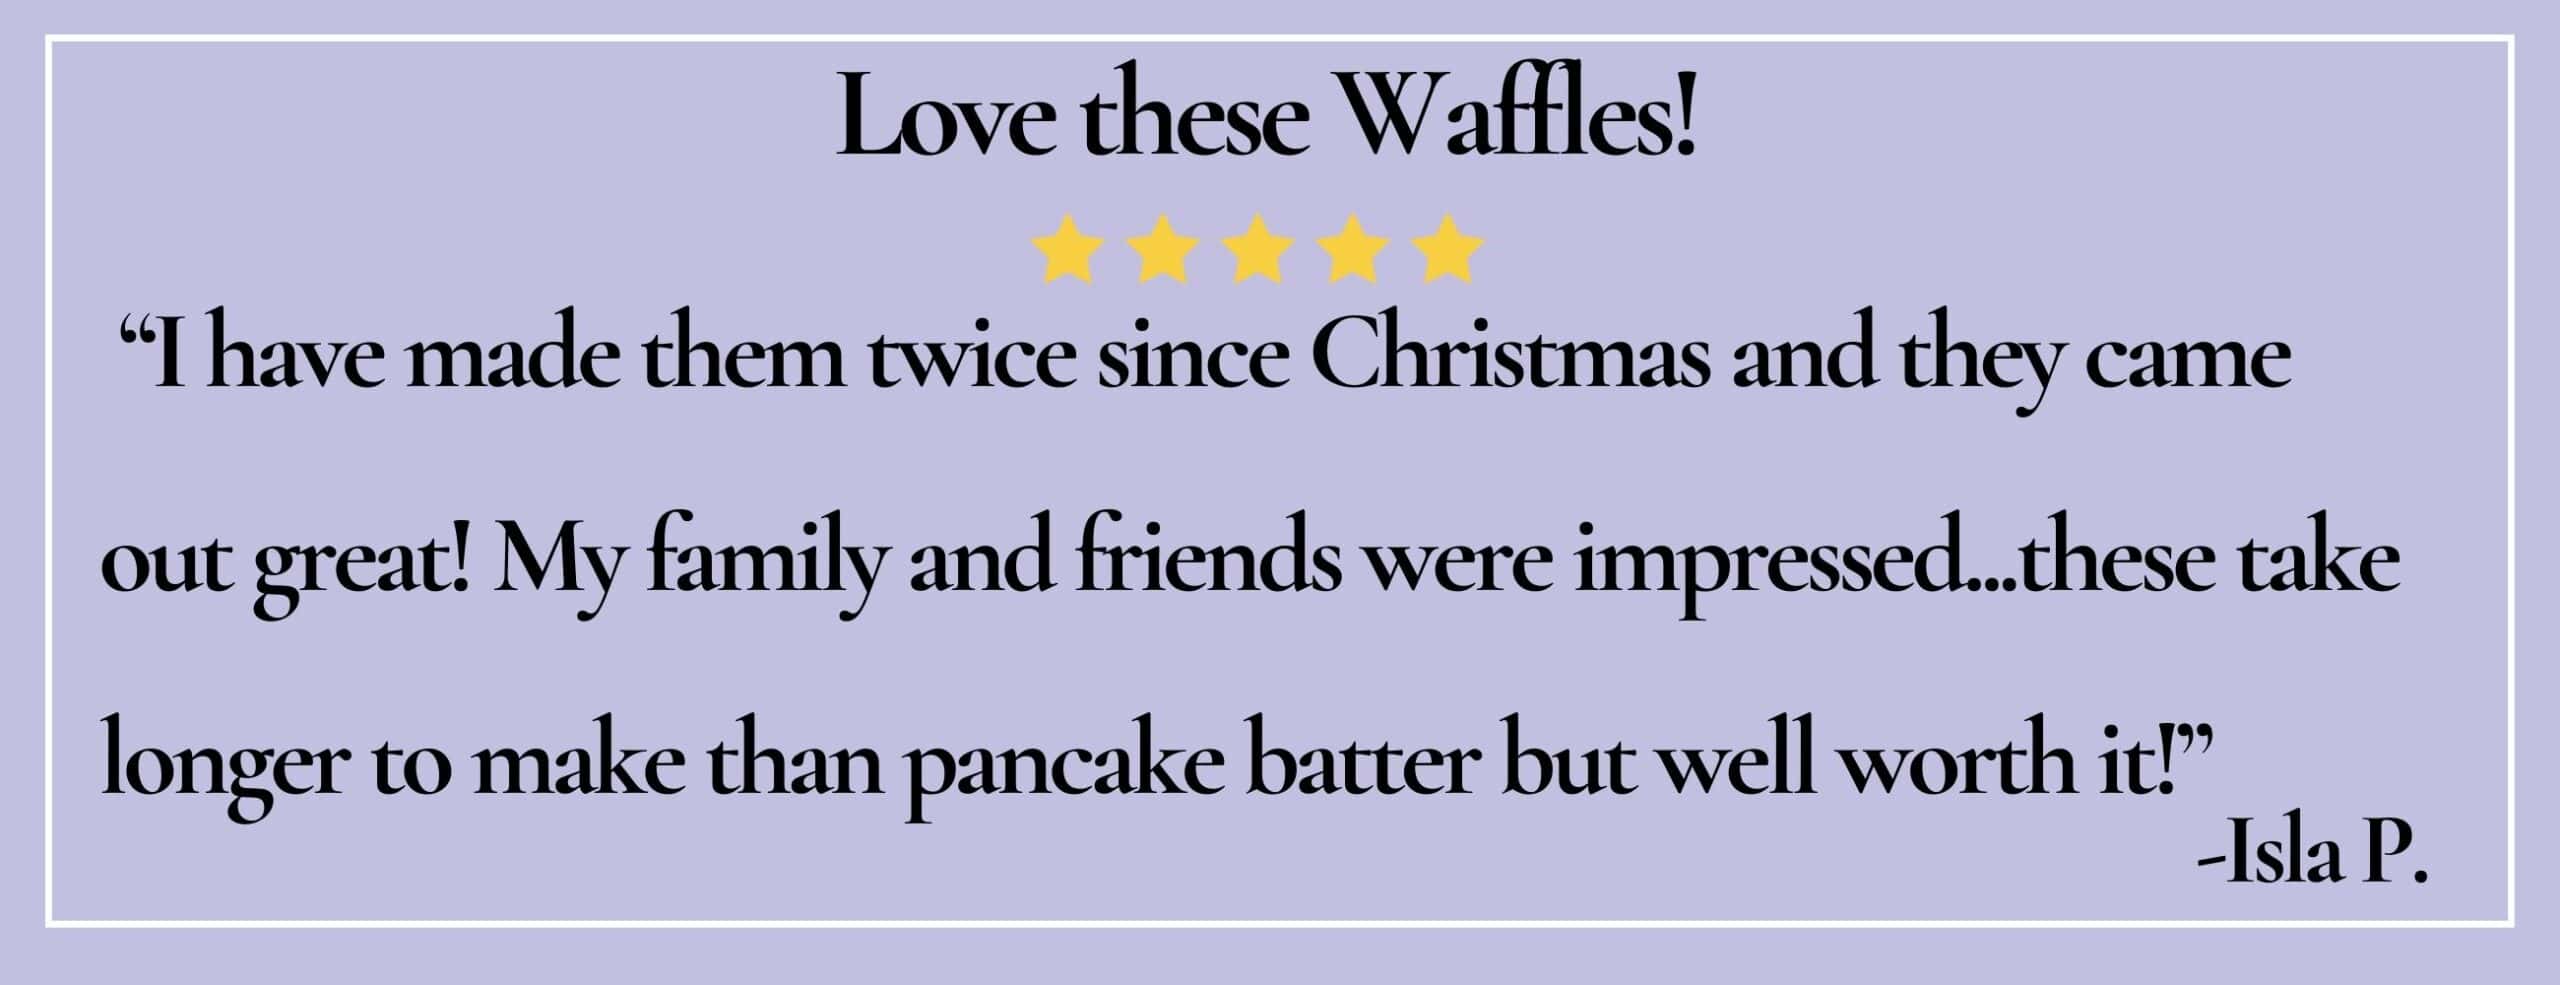 text box with paraphrase: Love these waffles! I have made them twice since Christmas and they came out great! -Isla P.